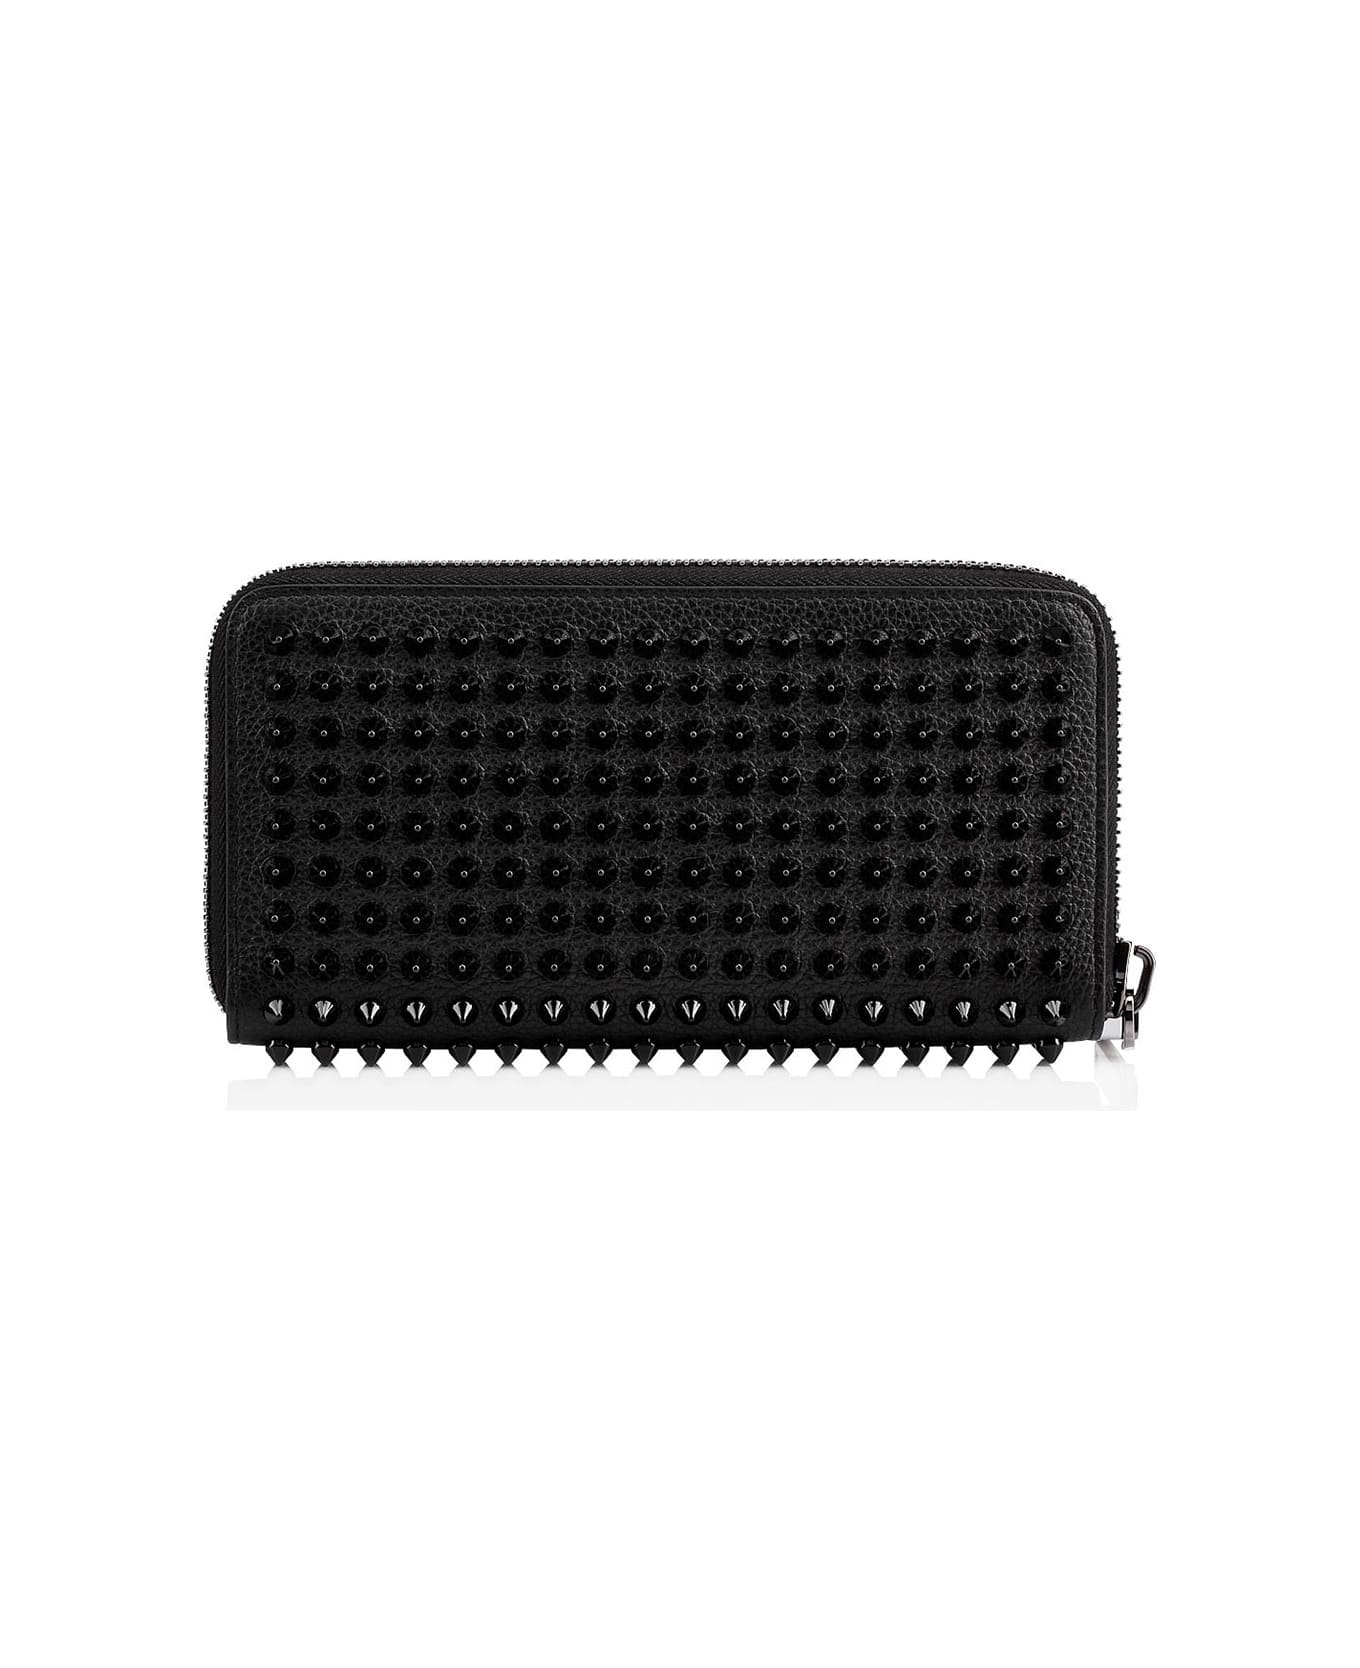 Christian Louboutin Leather Panettone Wallet With Spikes - Black